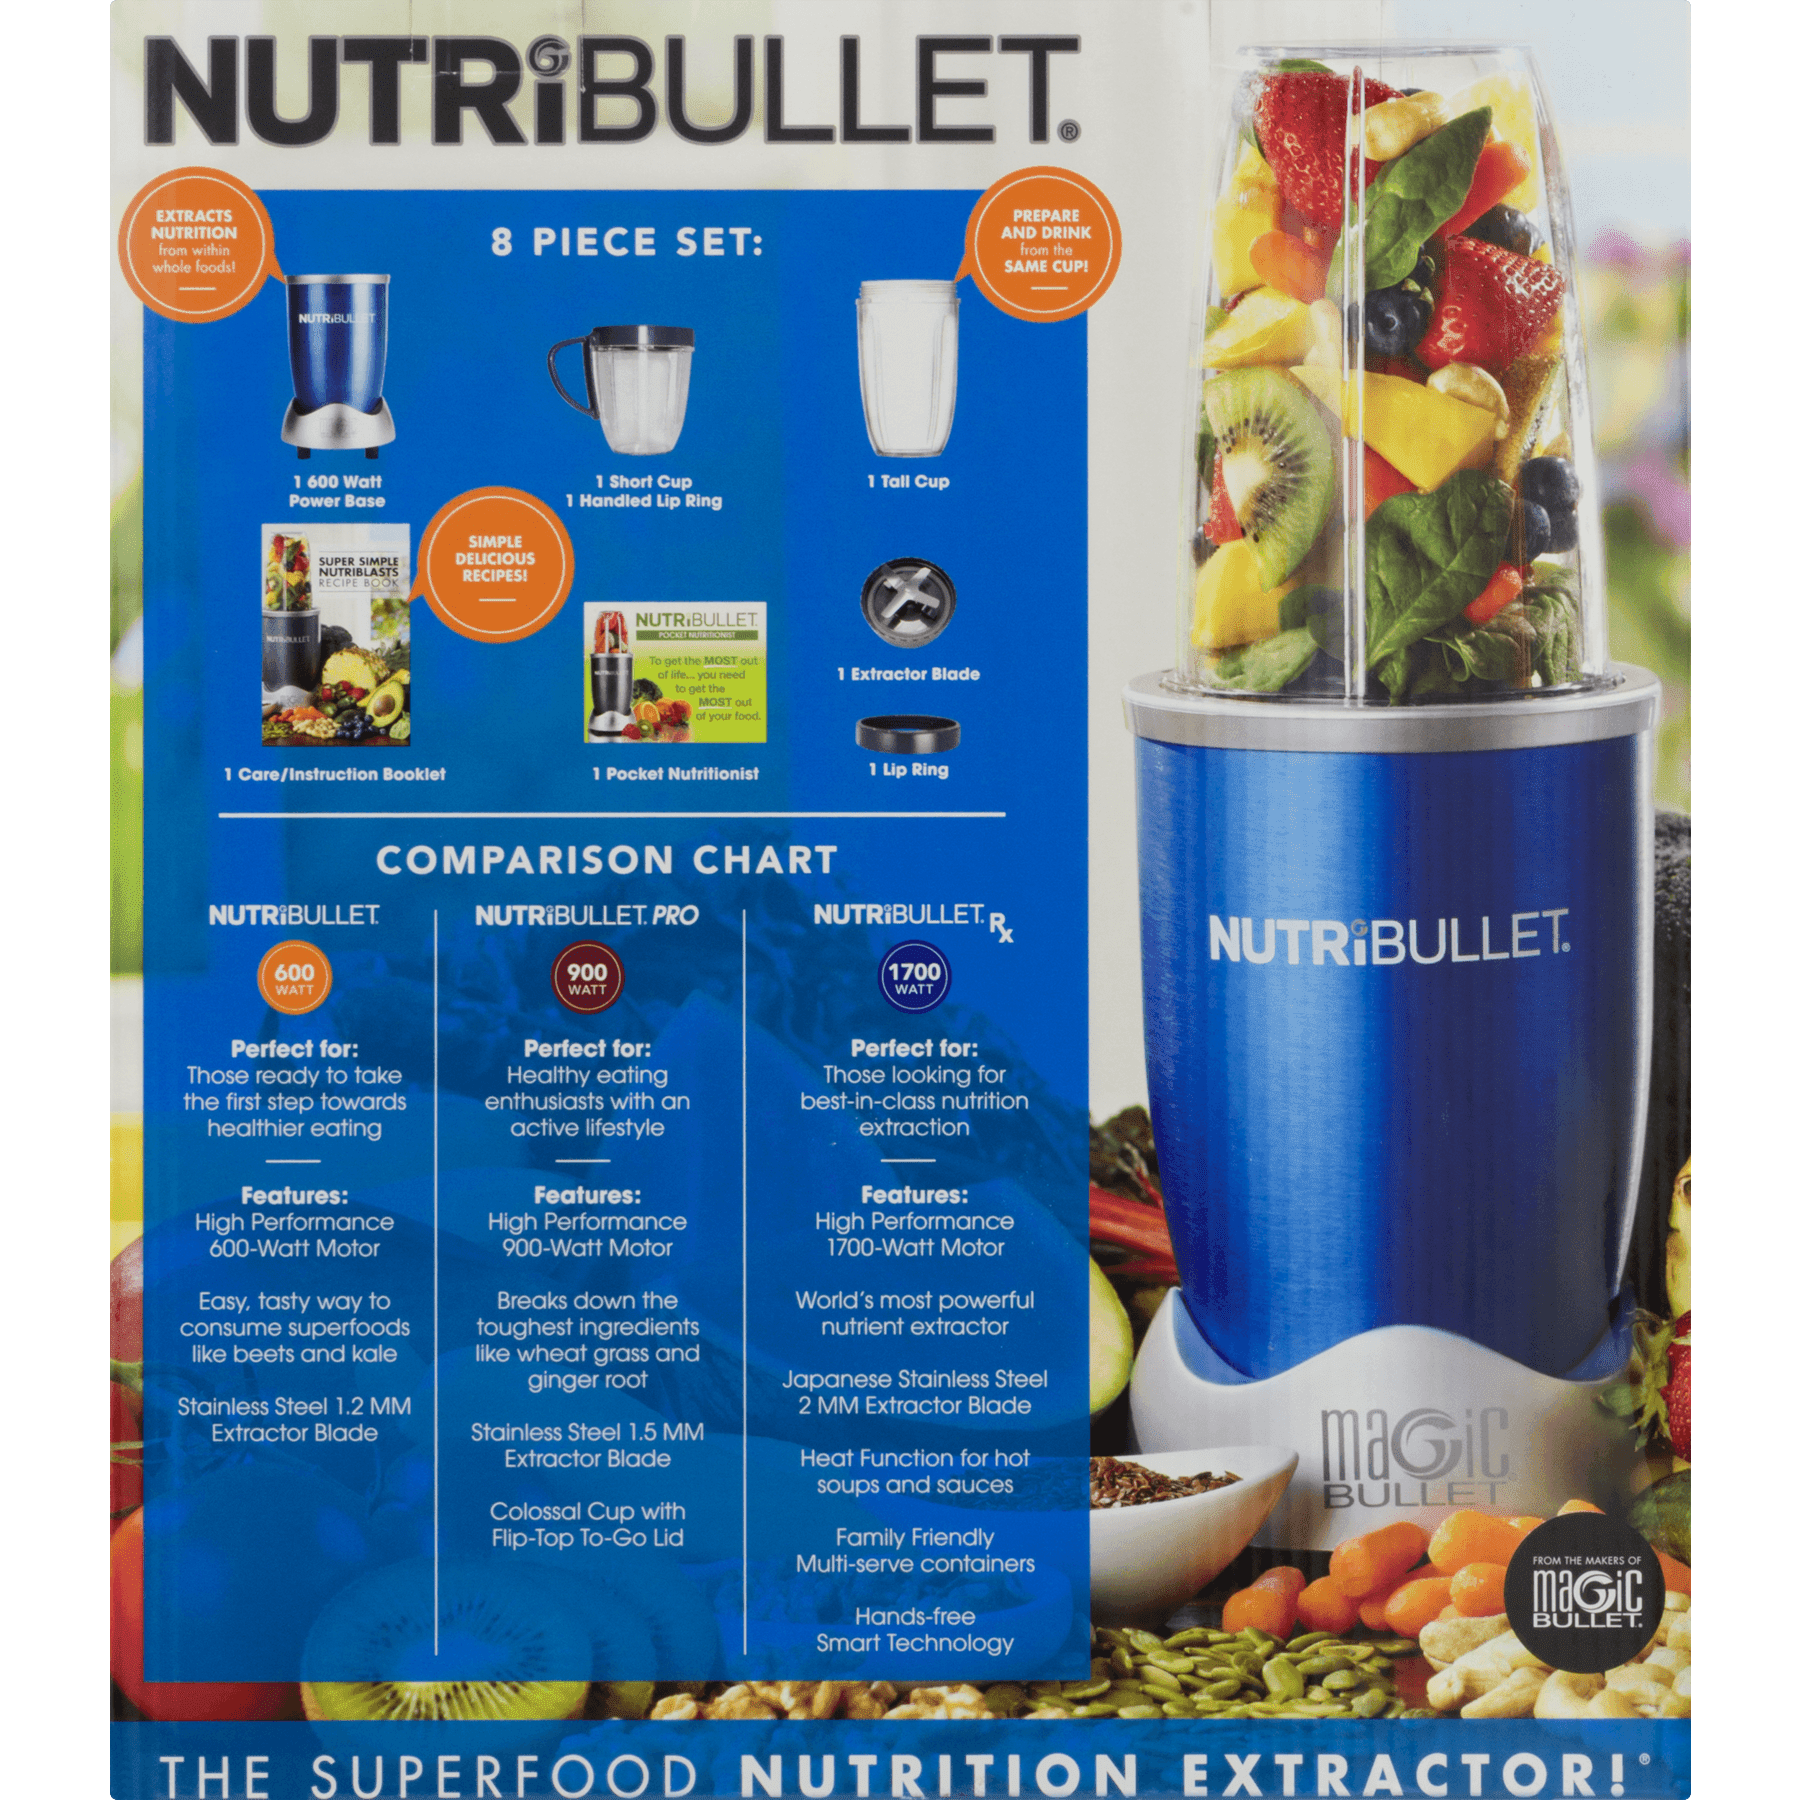 Magic Bullet Nutribullet 600 W 8-Piece High Speed Personal